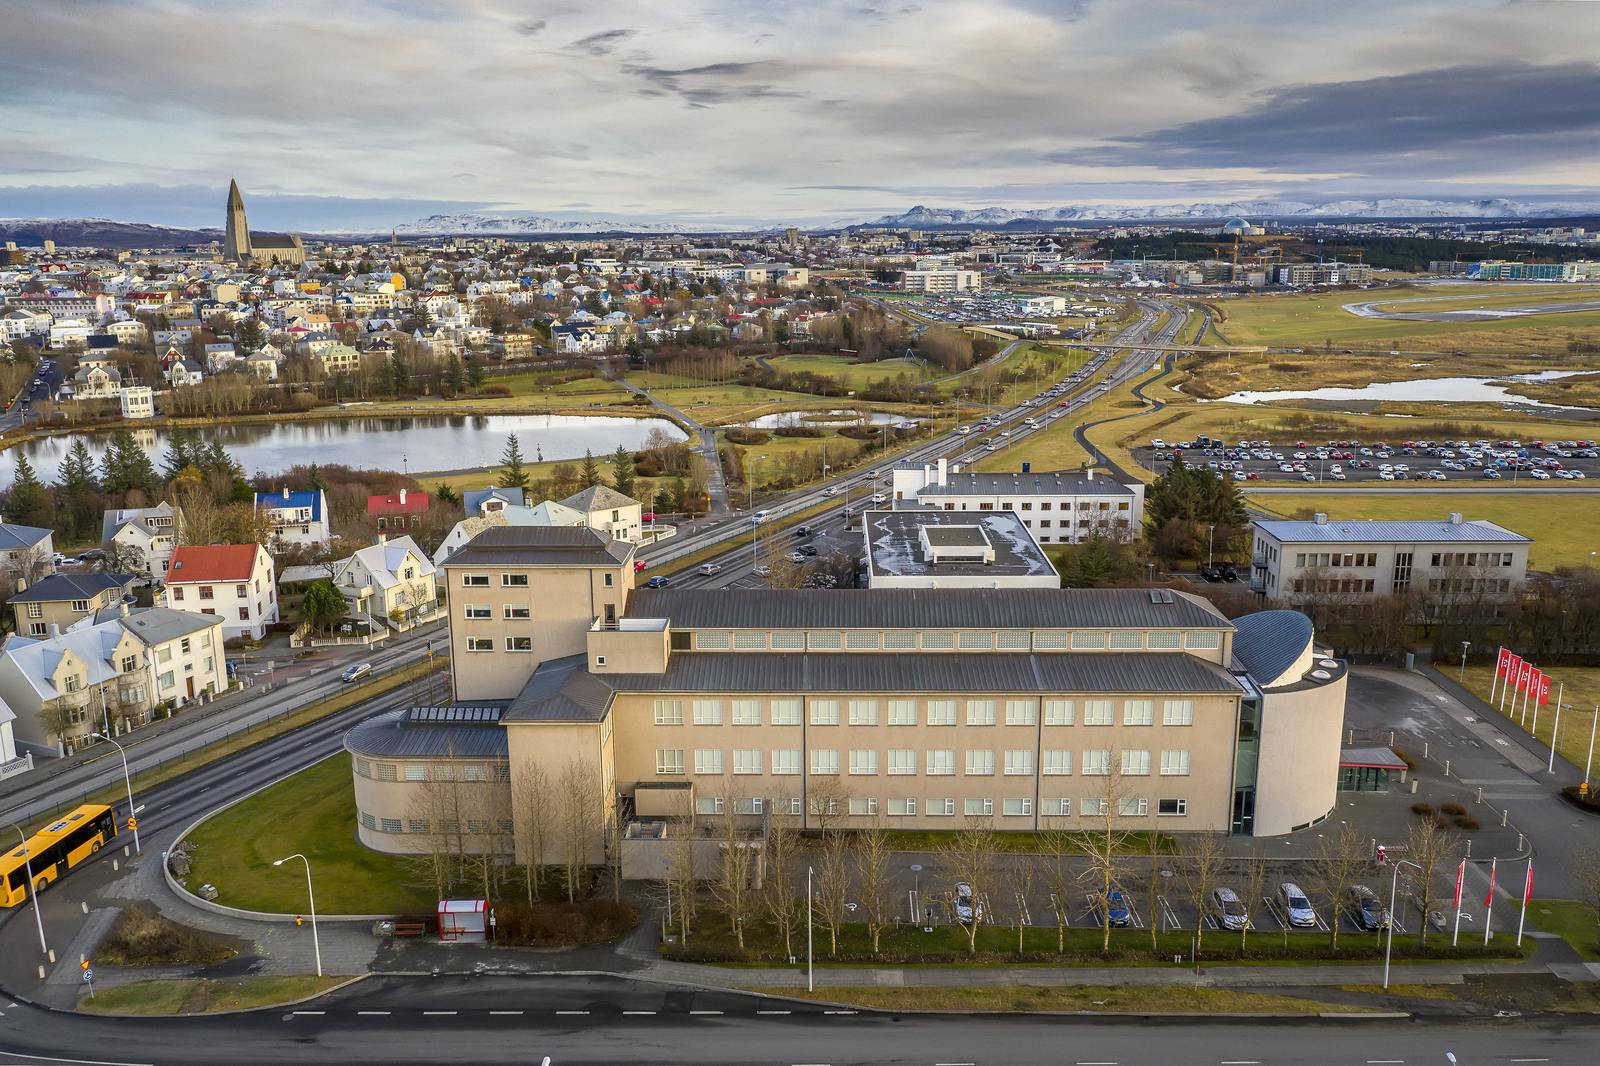 The national museum of Iceland